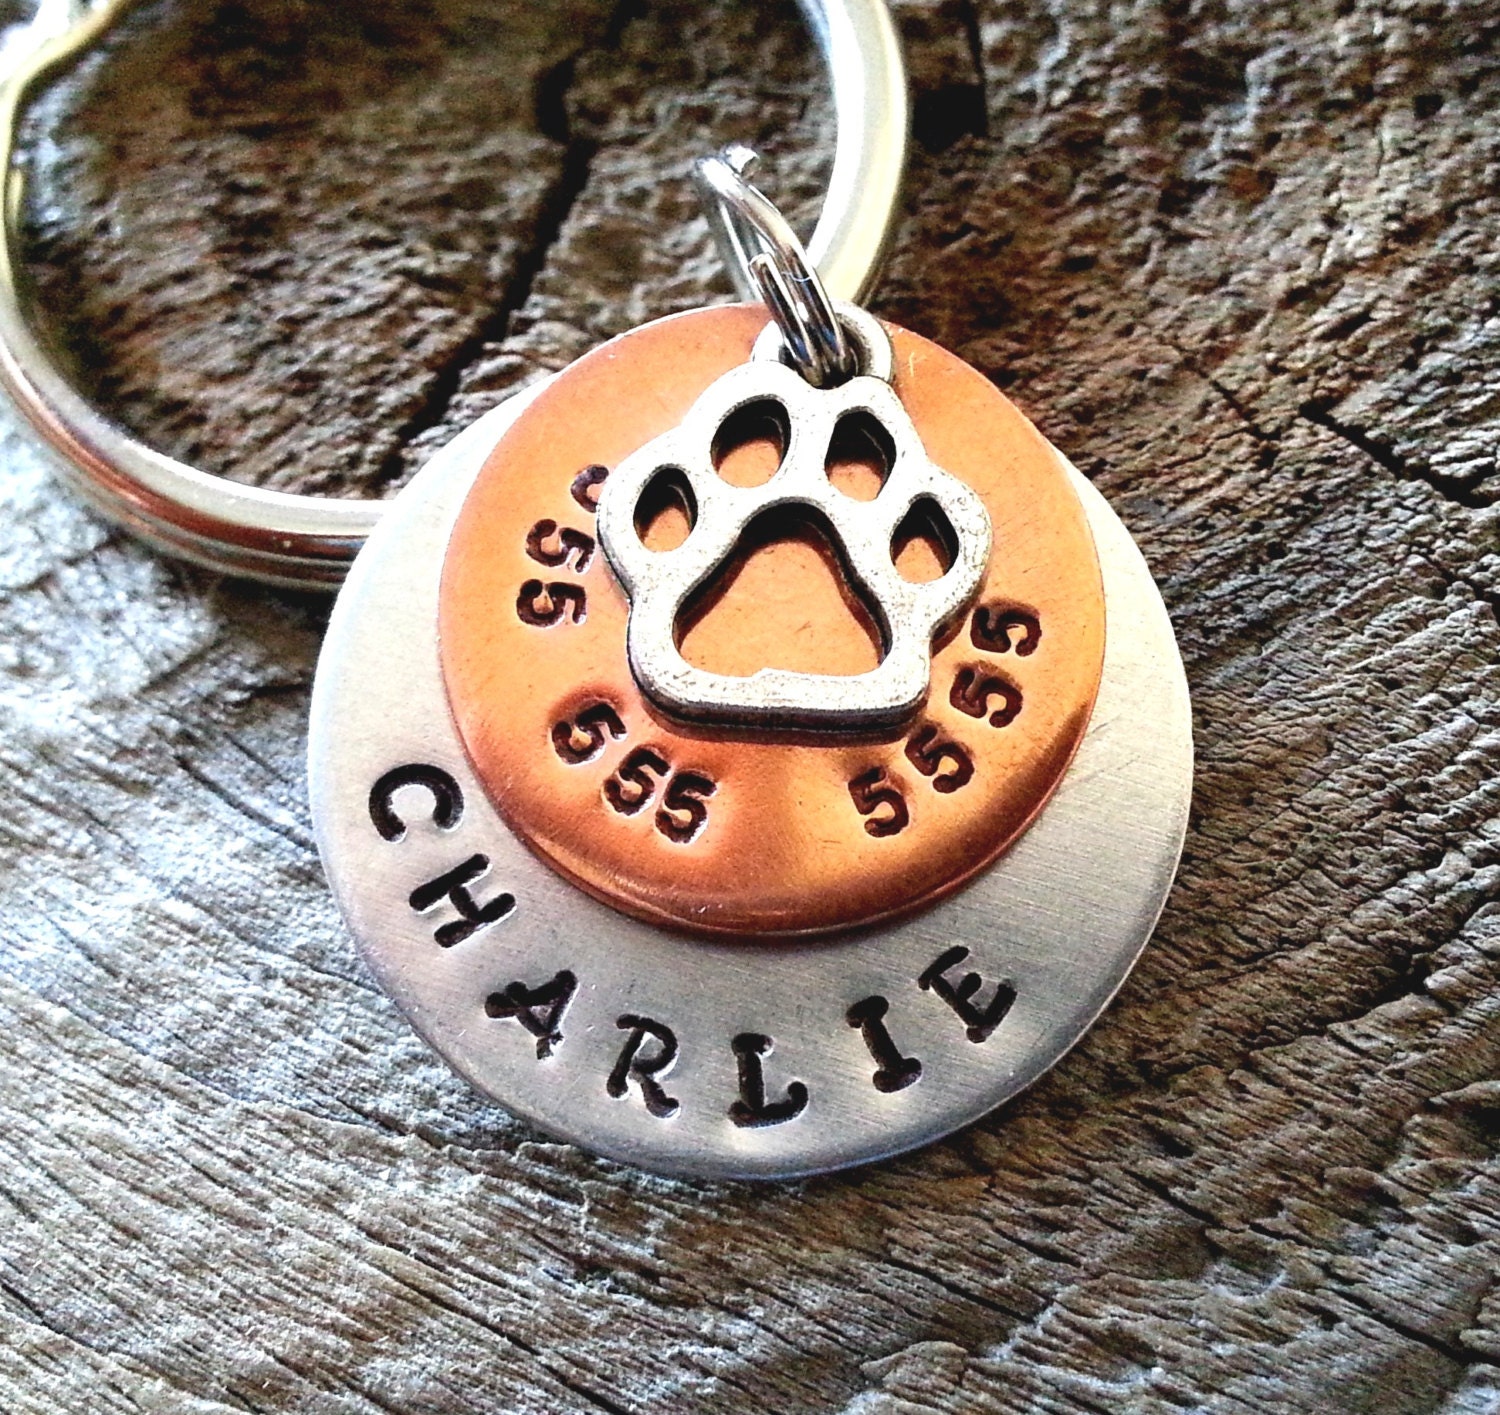 pretty dog tags for pets